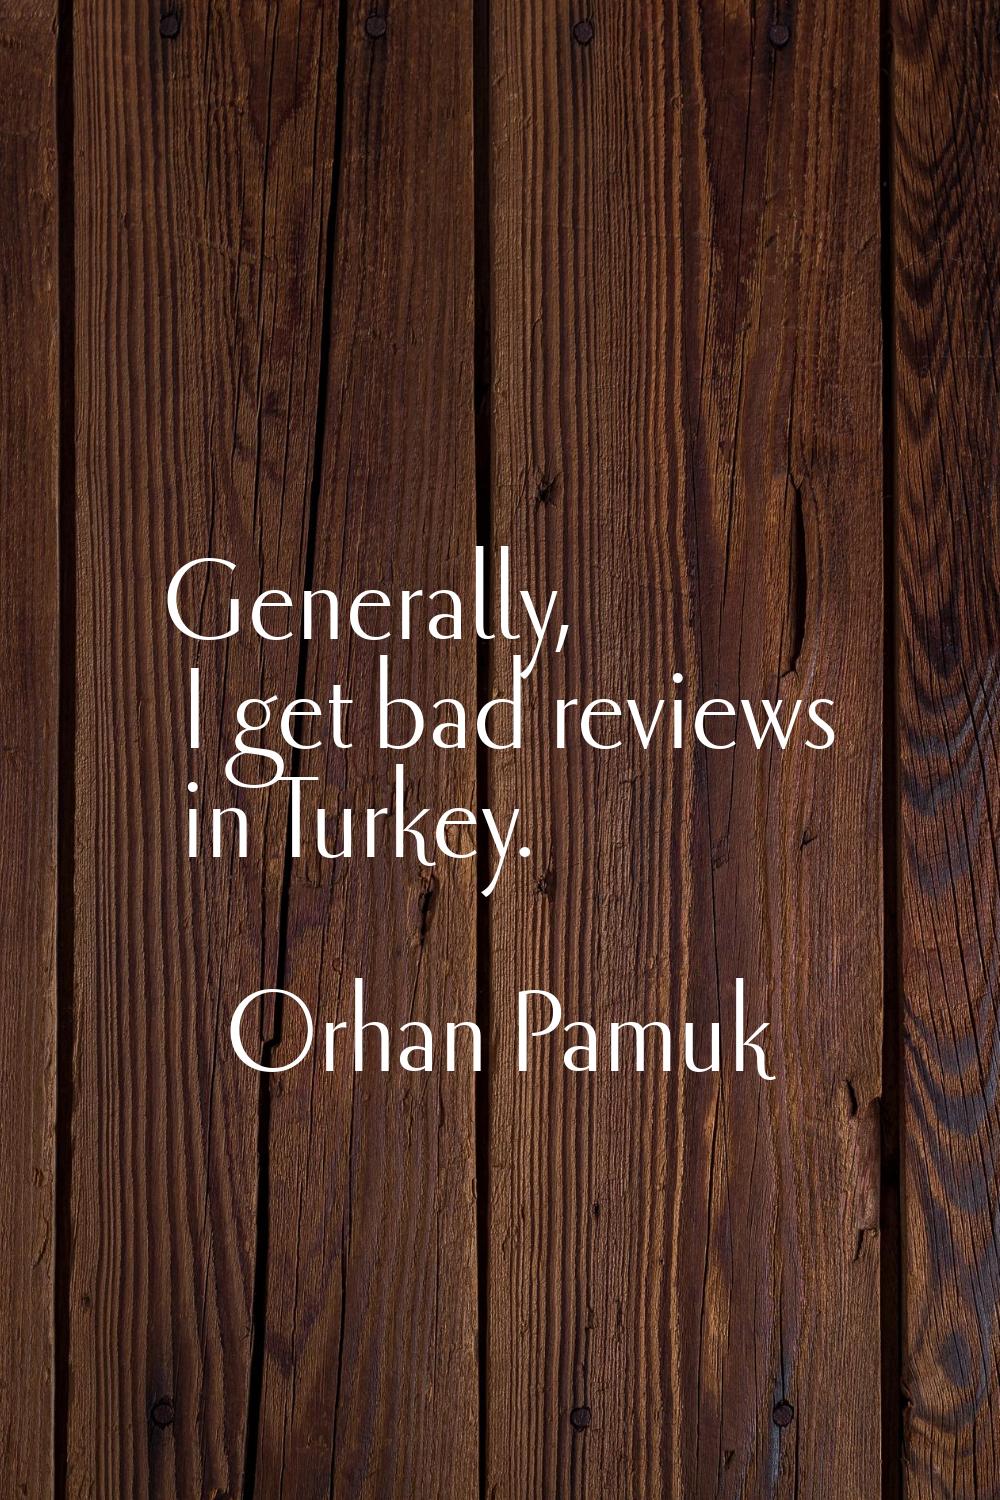 Generally, I get bad reviews in Turkey.